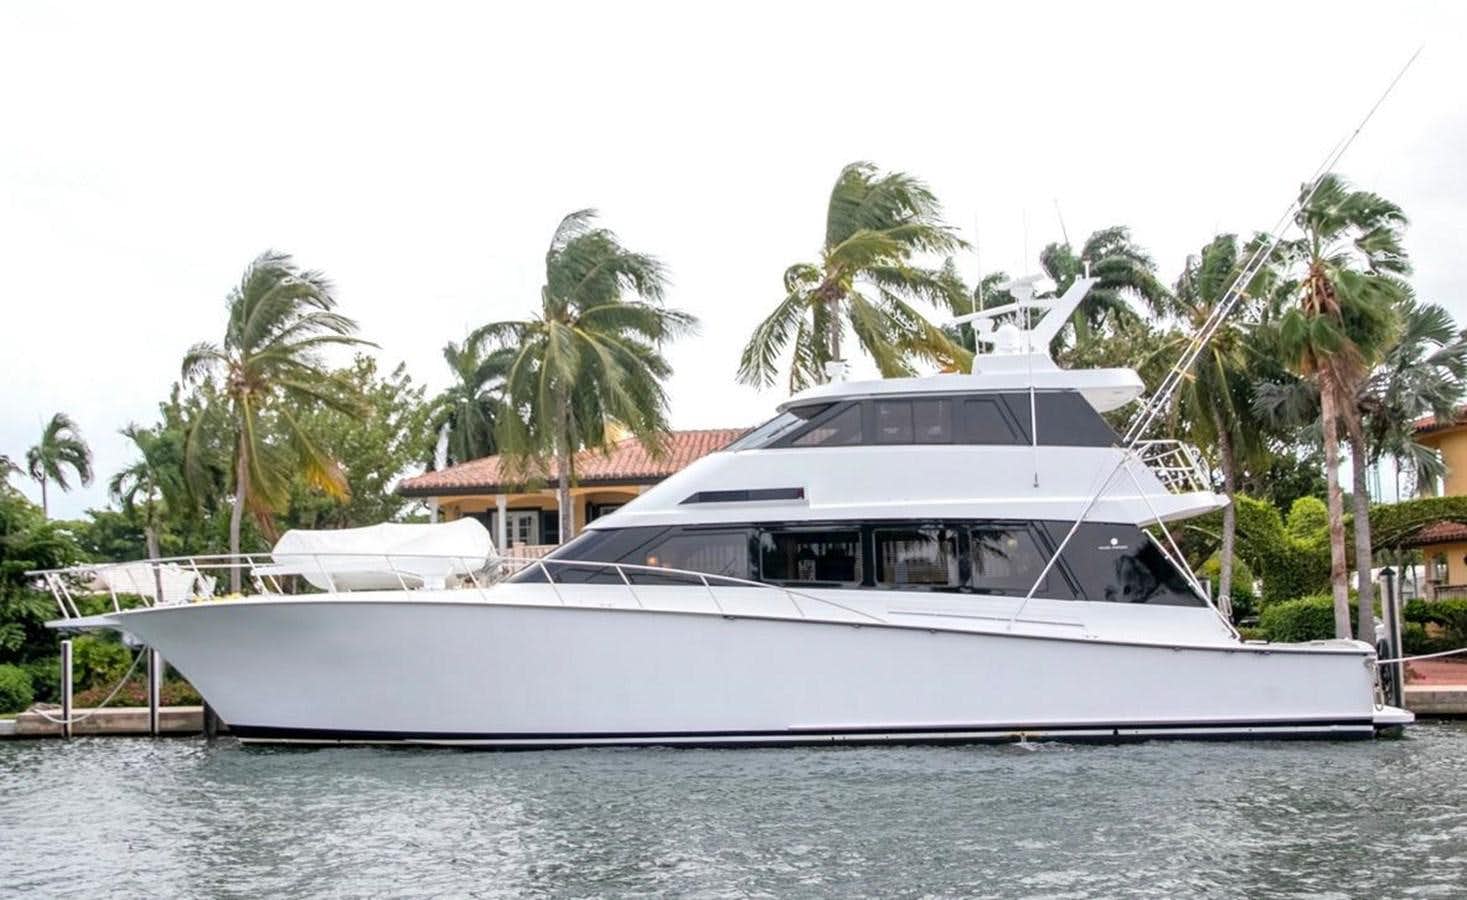 Chairman
Yacht for Sale